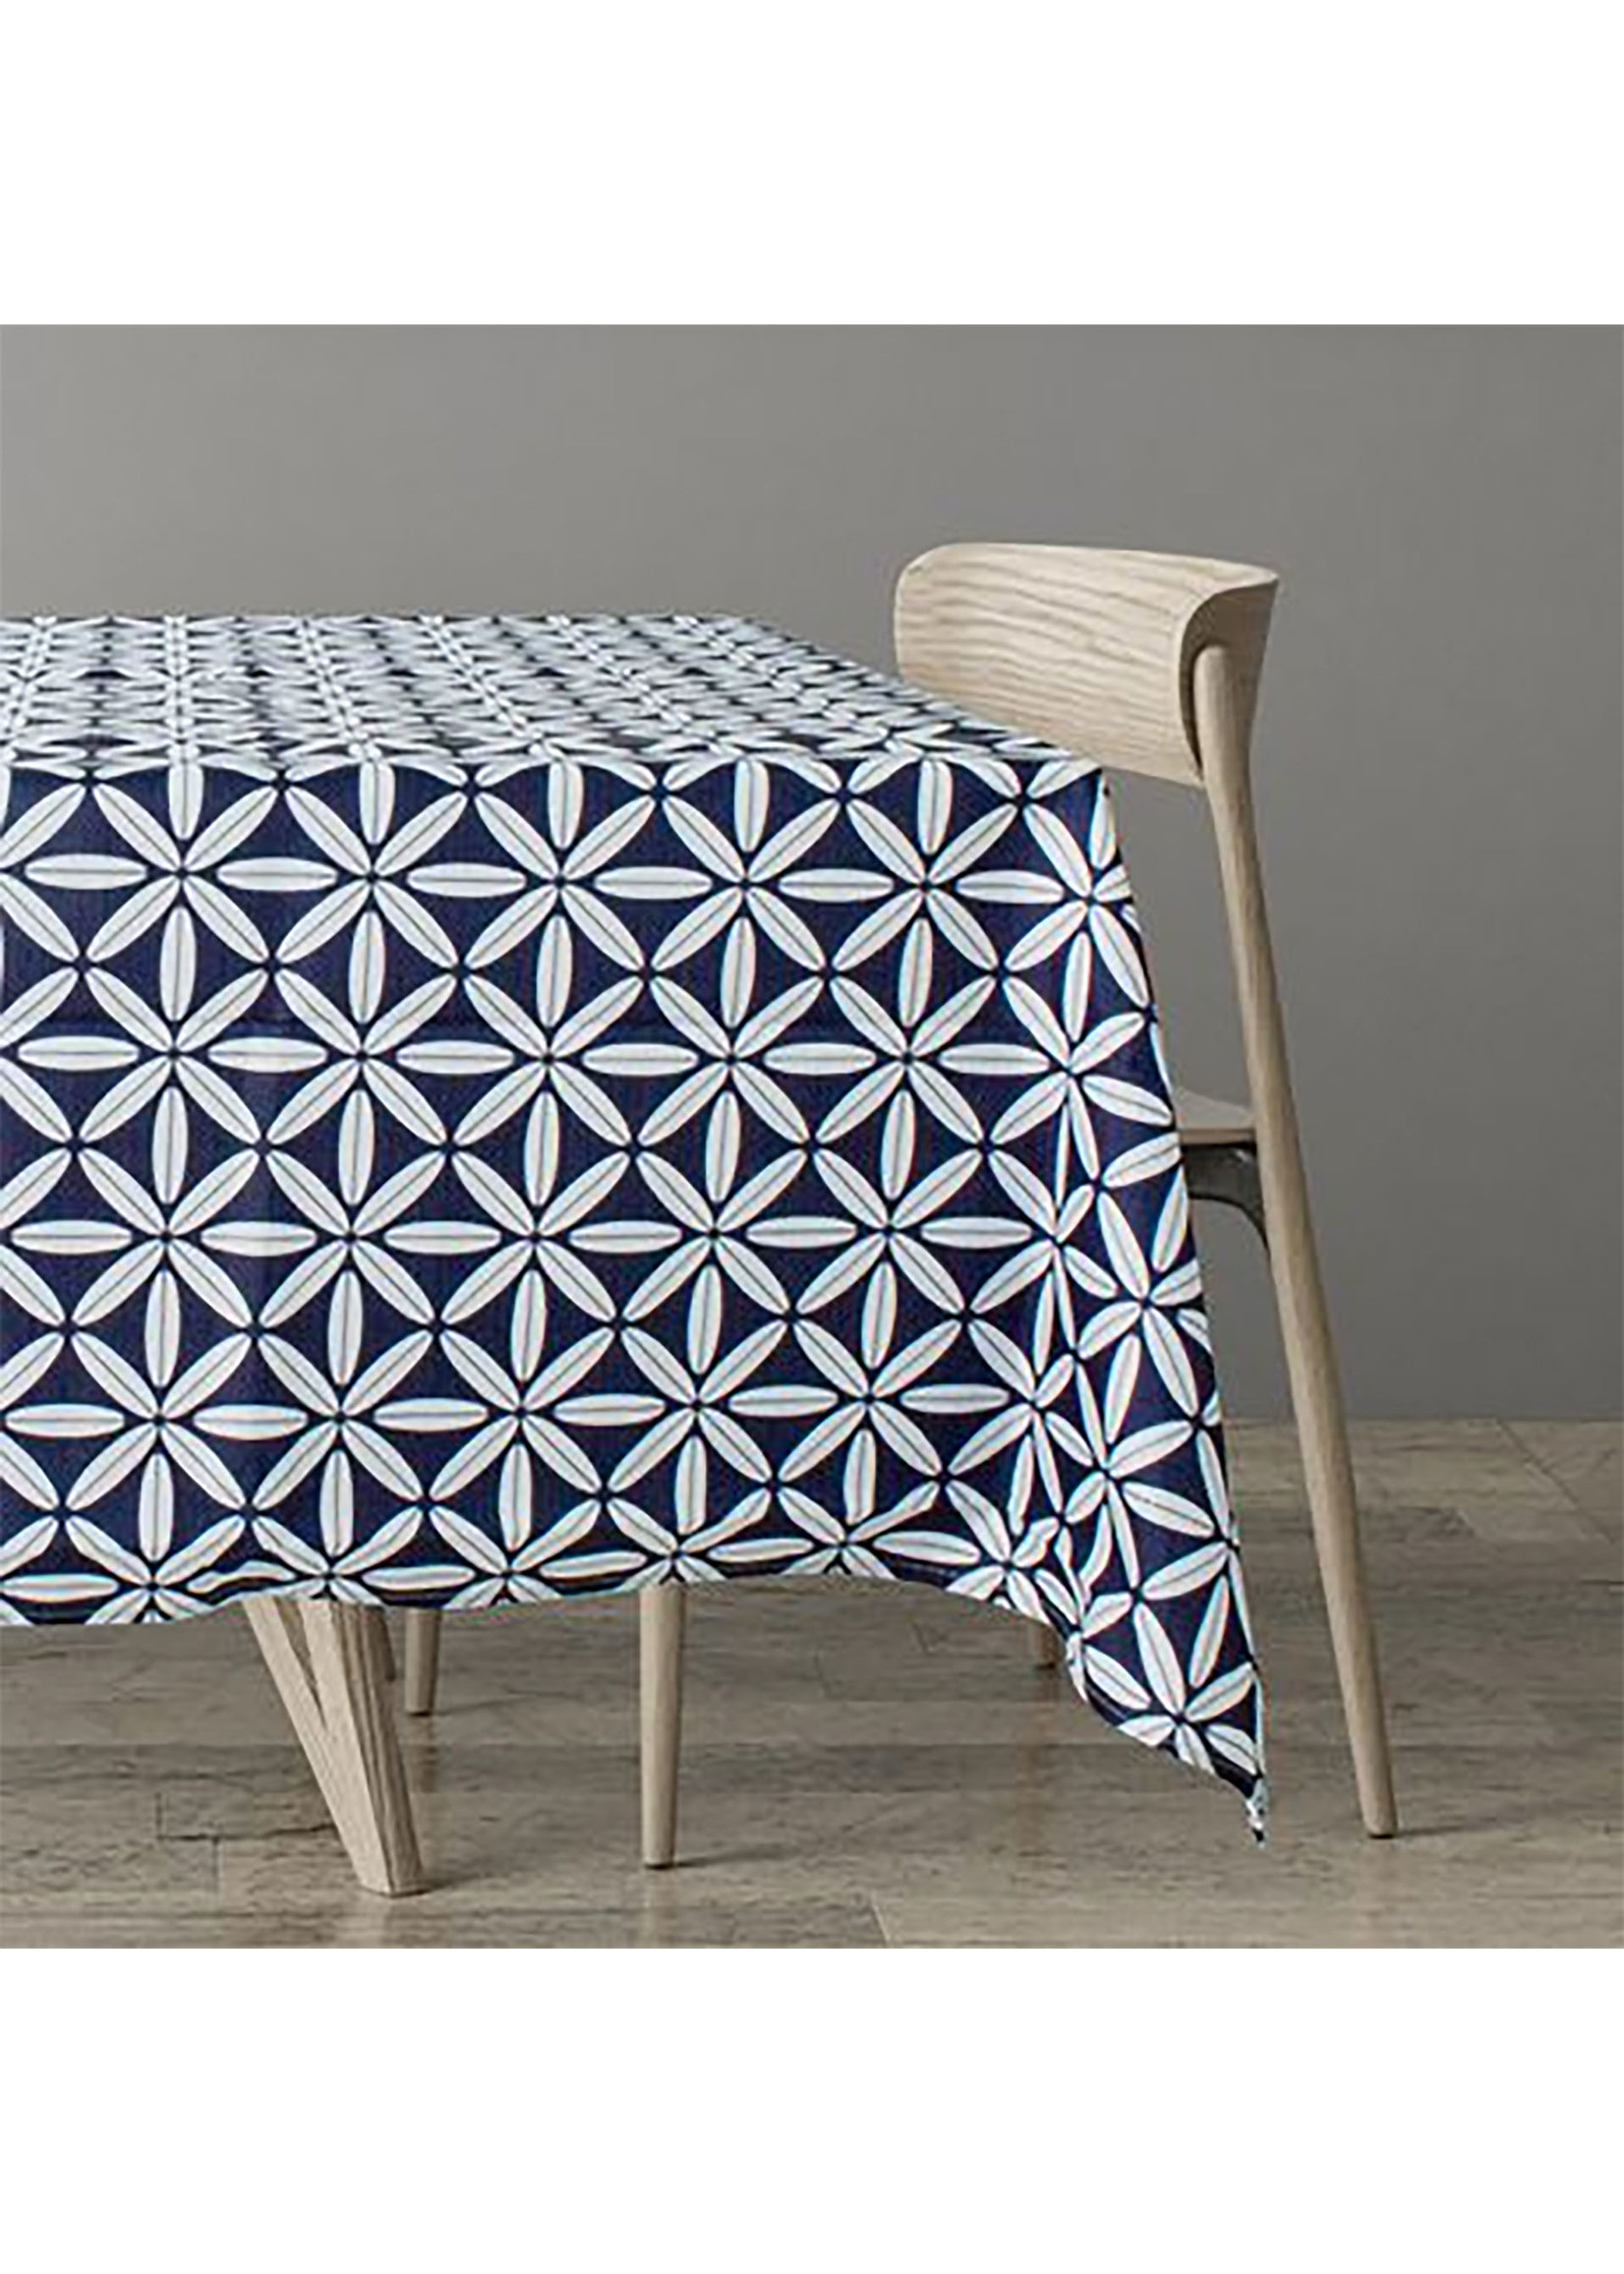 60x84" Fabric Tablecloth Navy Floral